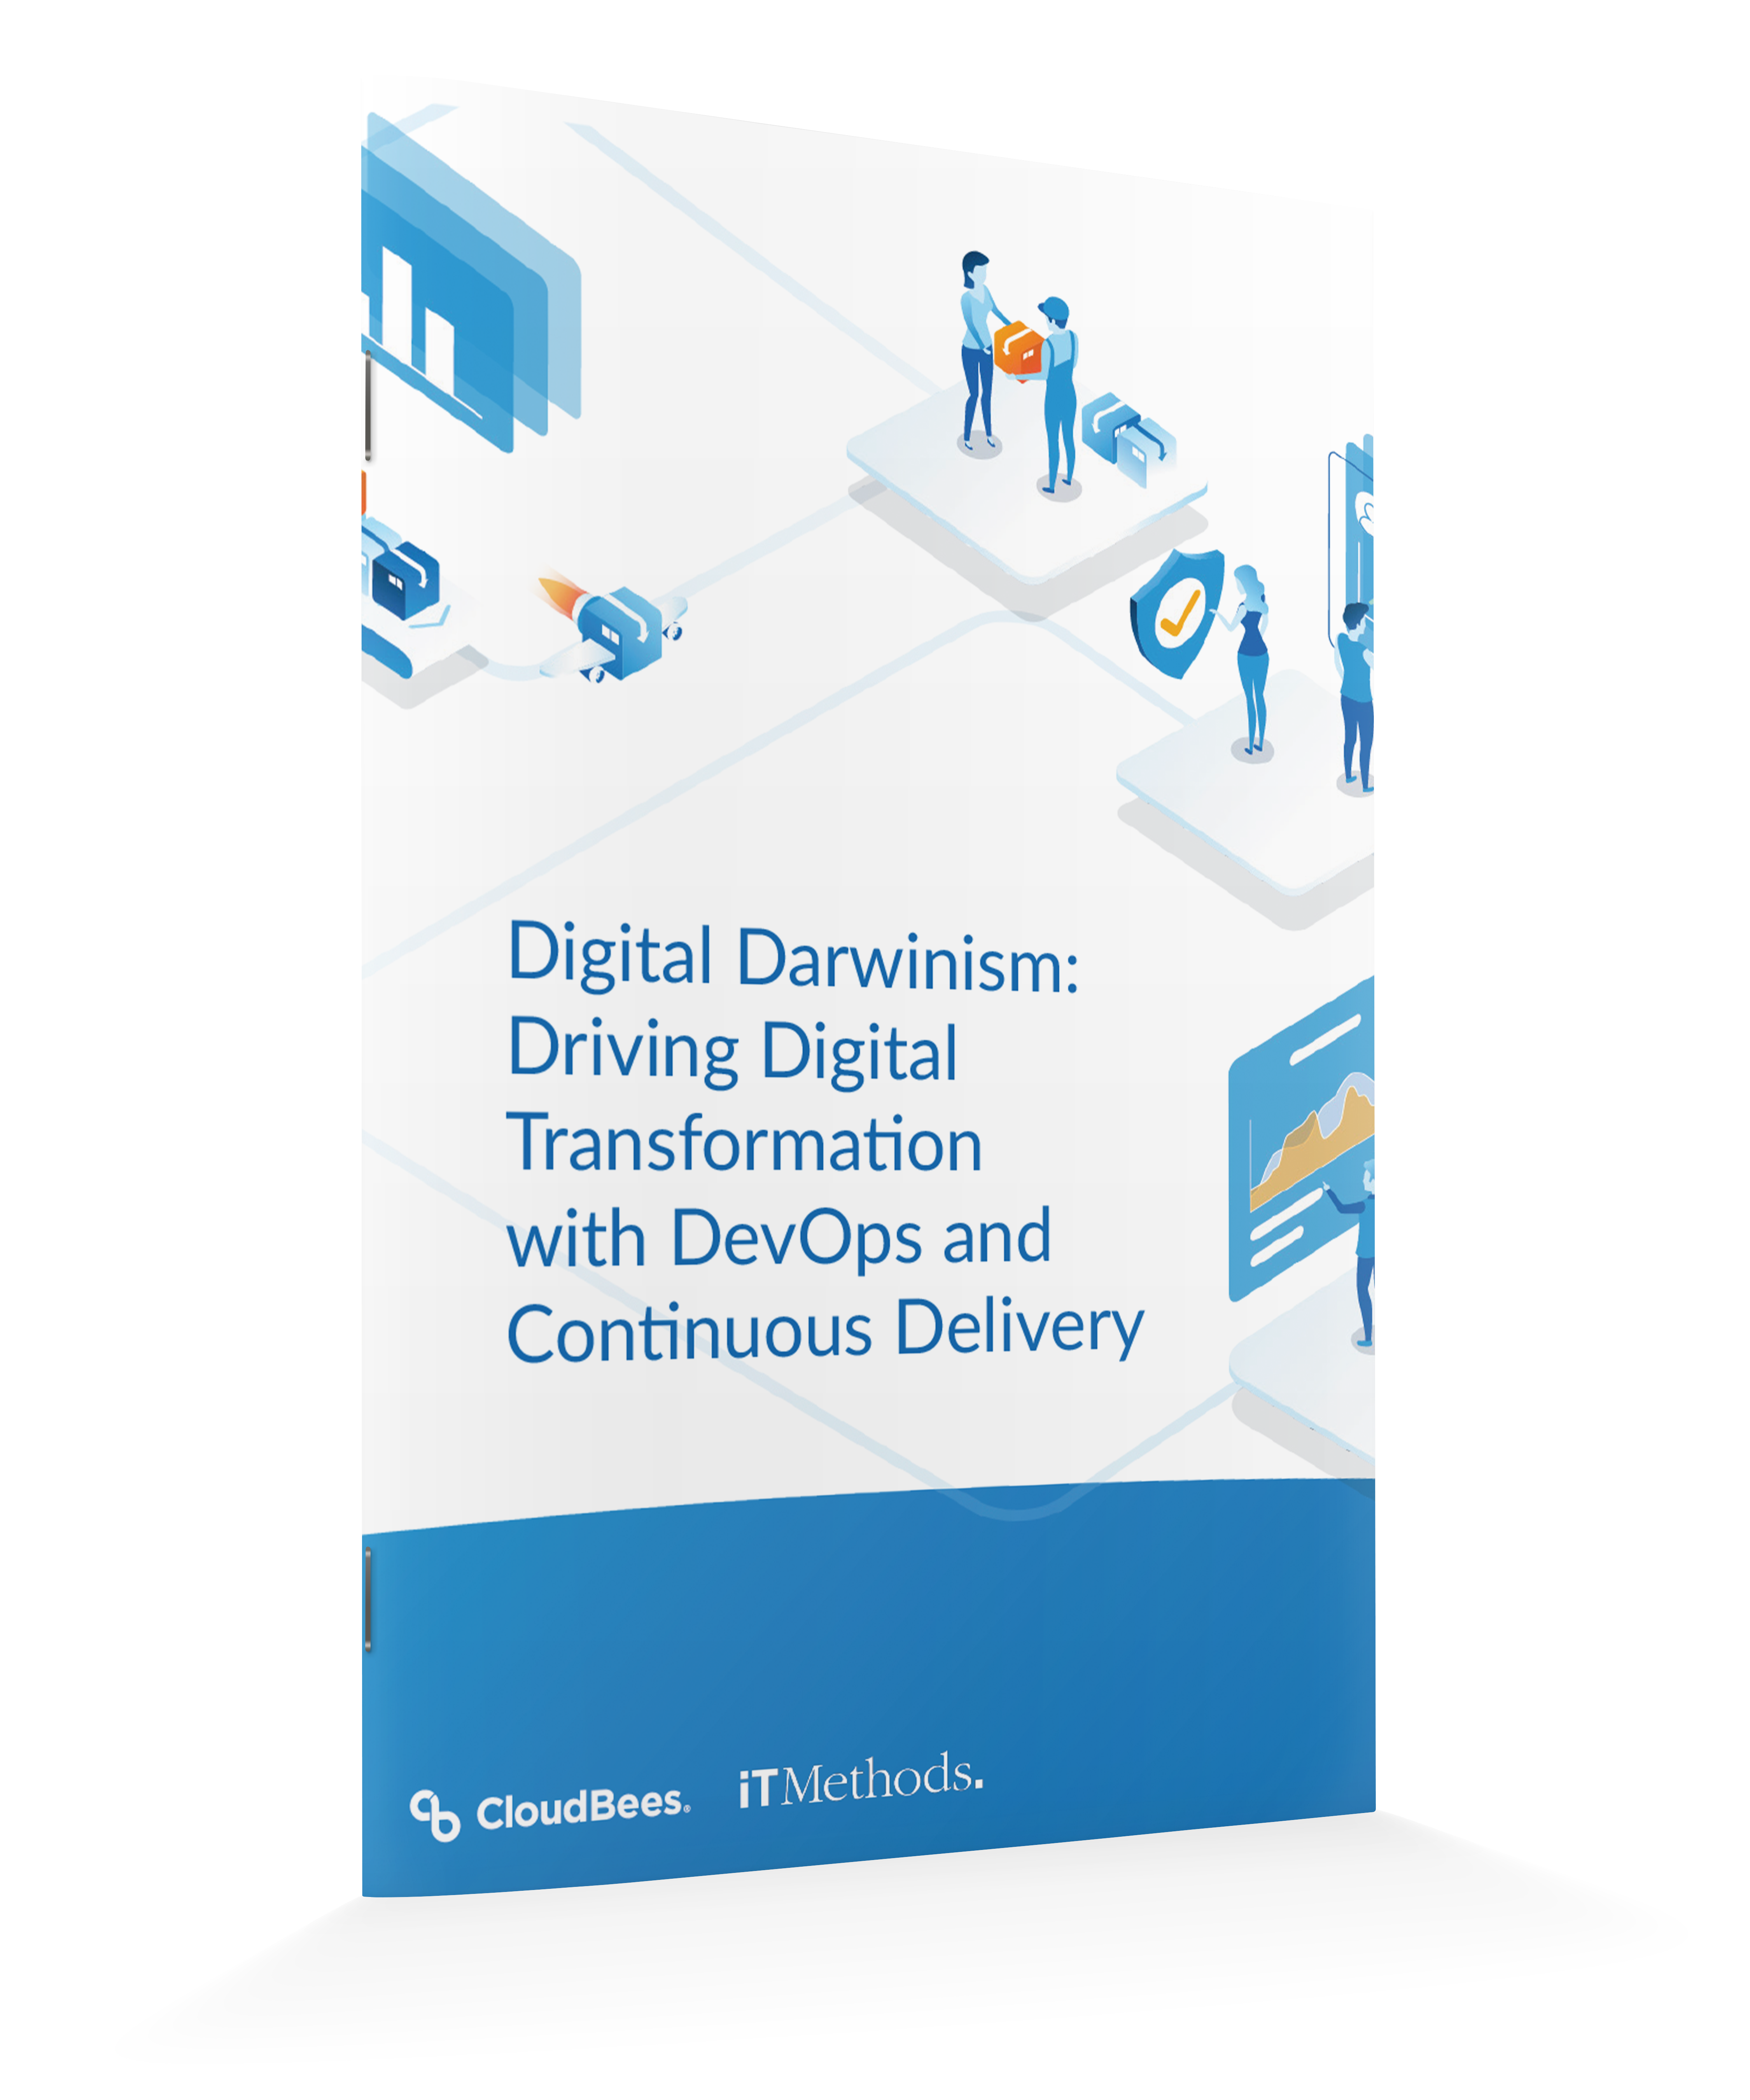 Digital Darwinism: Driving Digital Transformation with DevOps and Continuous Delivery